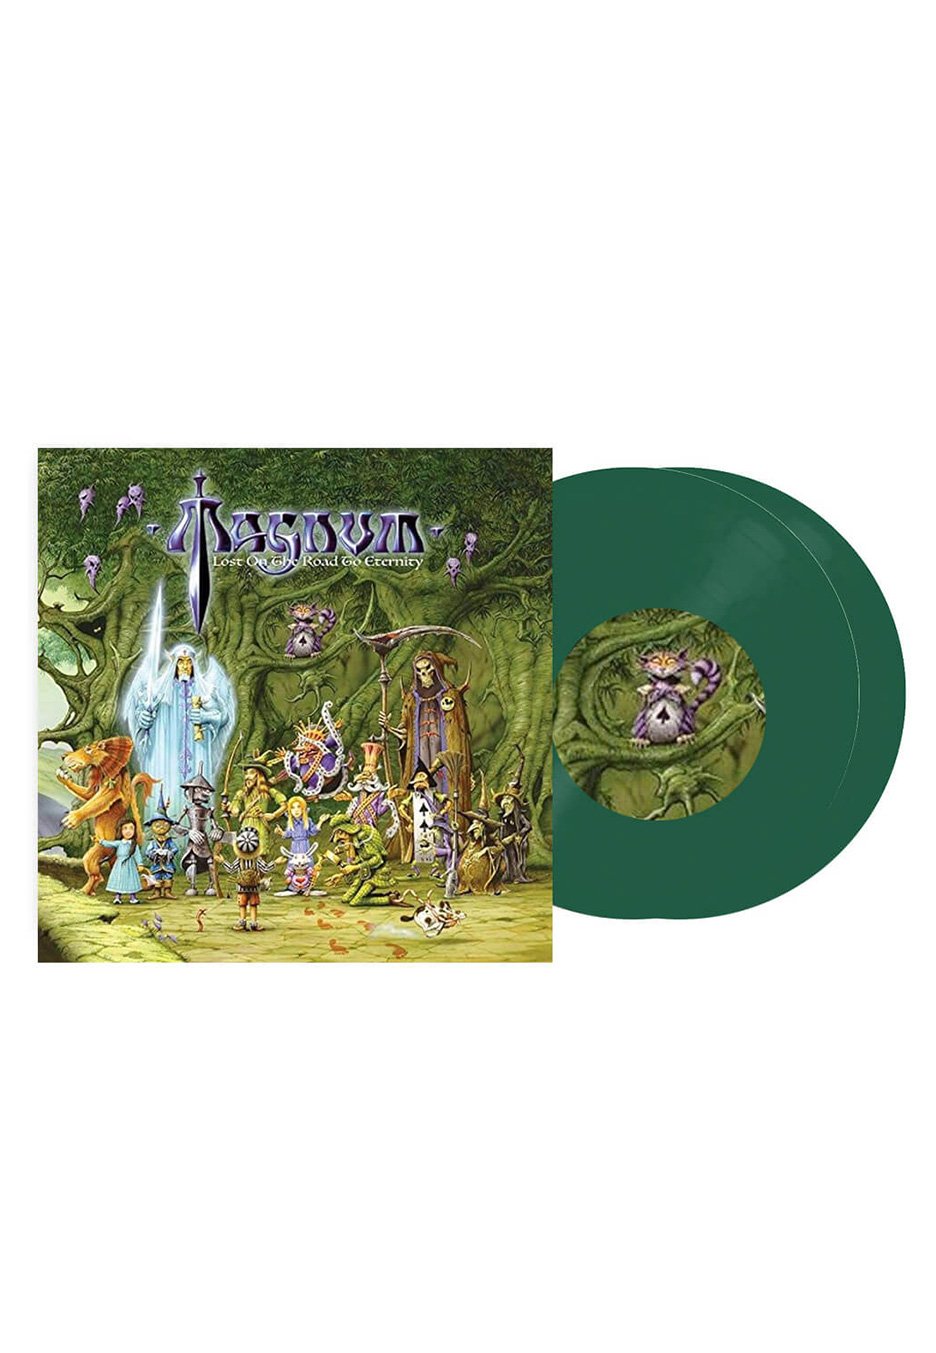 Magnum - Lost On The Road To Eternity Solid Verde - Colored 2 Vinyl